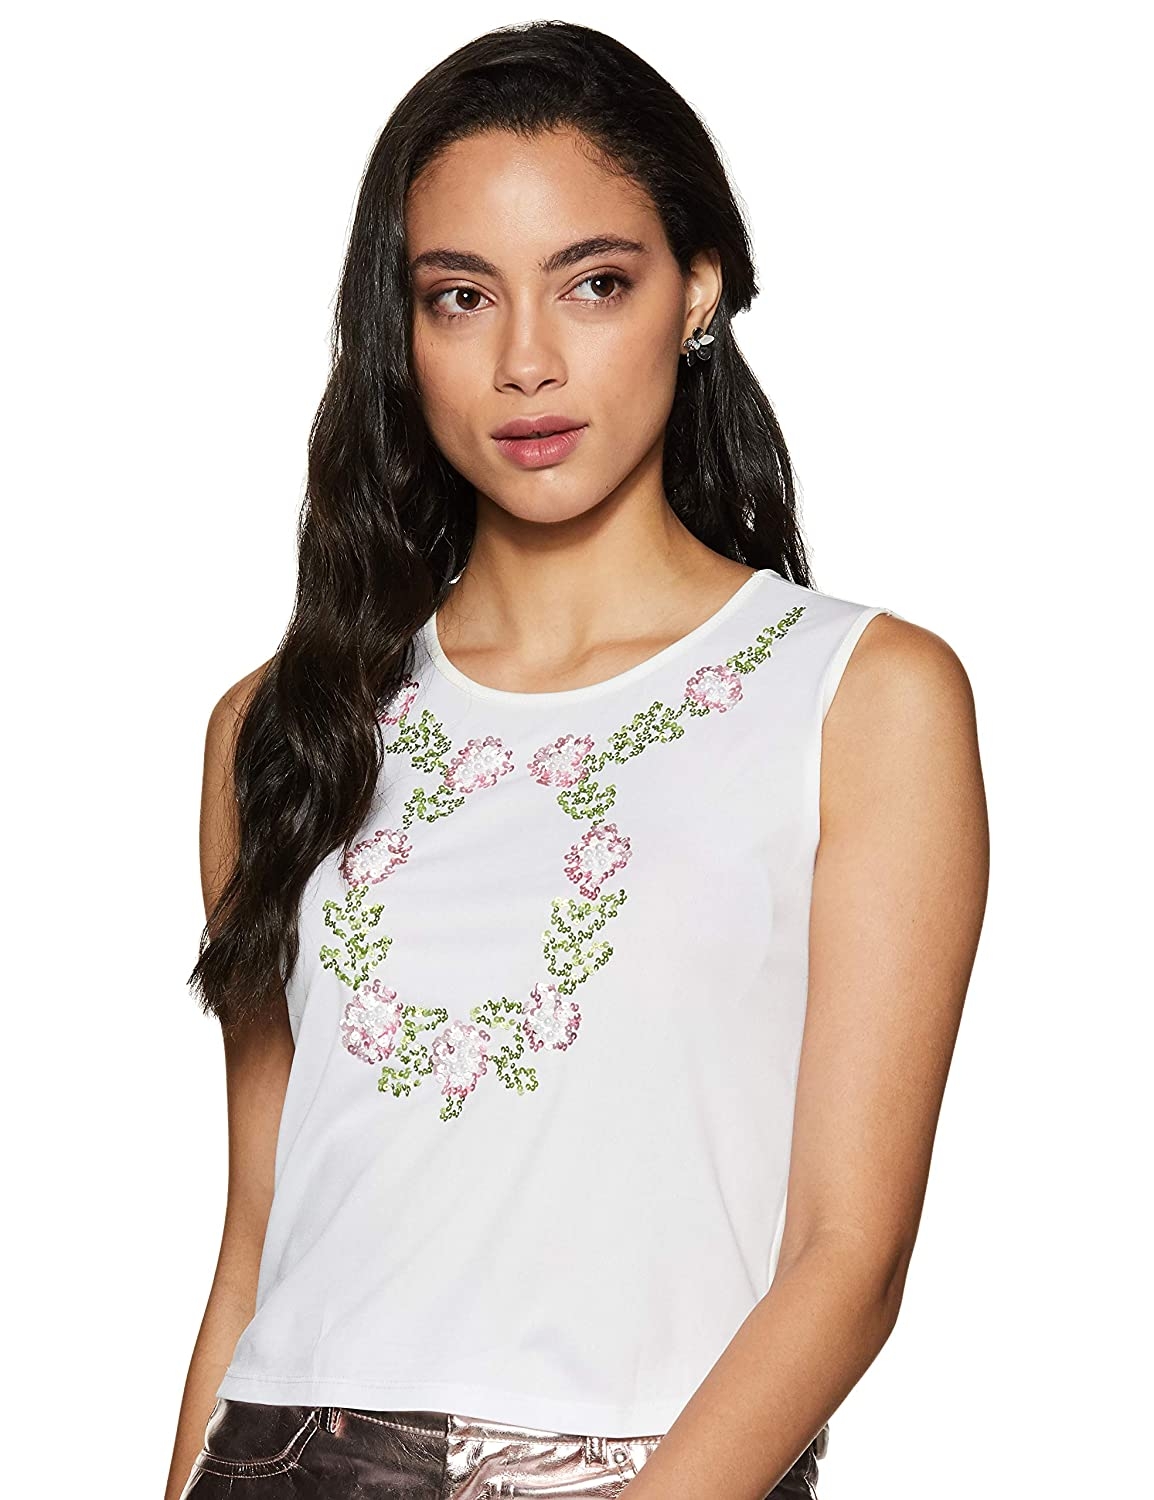 LY2 Elegant flower design , hand embellished Top with comfortable cotton fabric. (White_M)